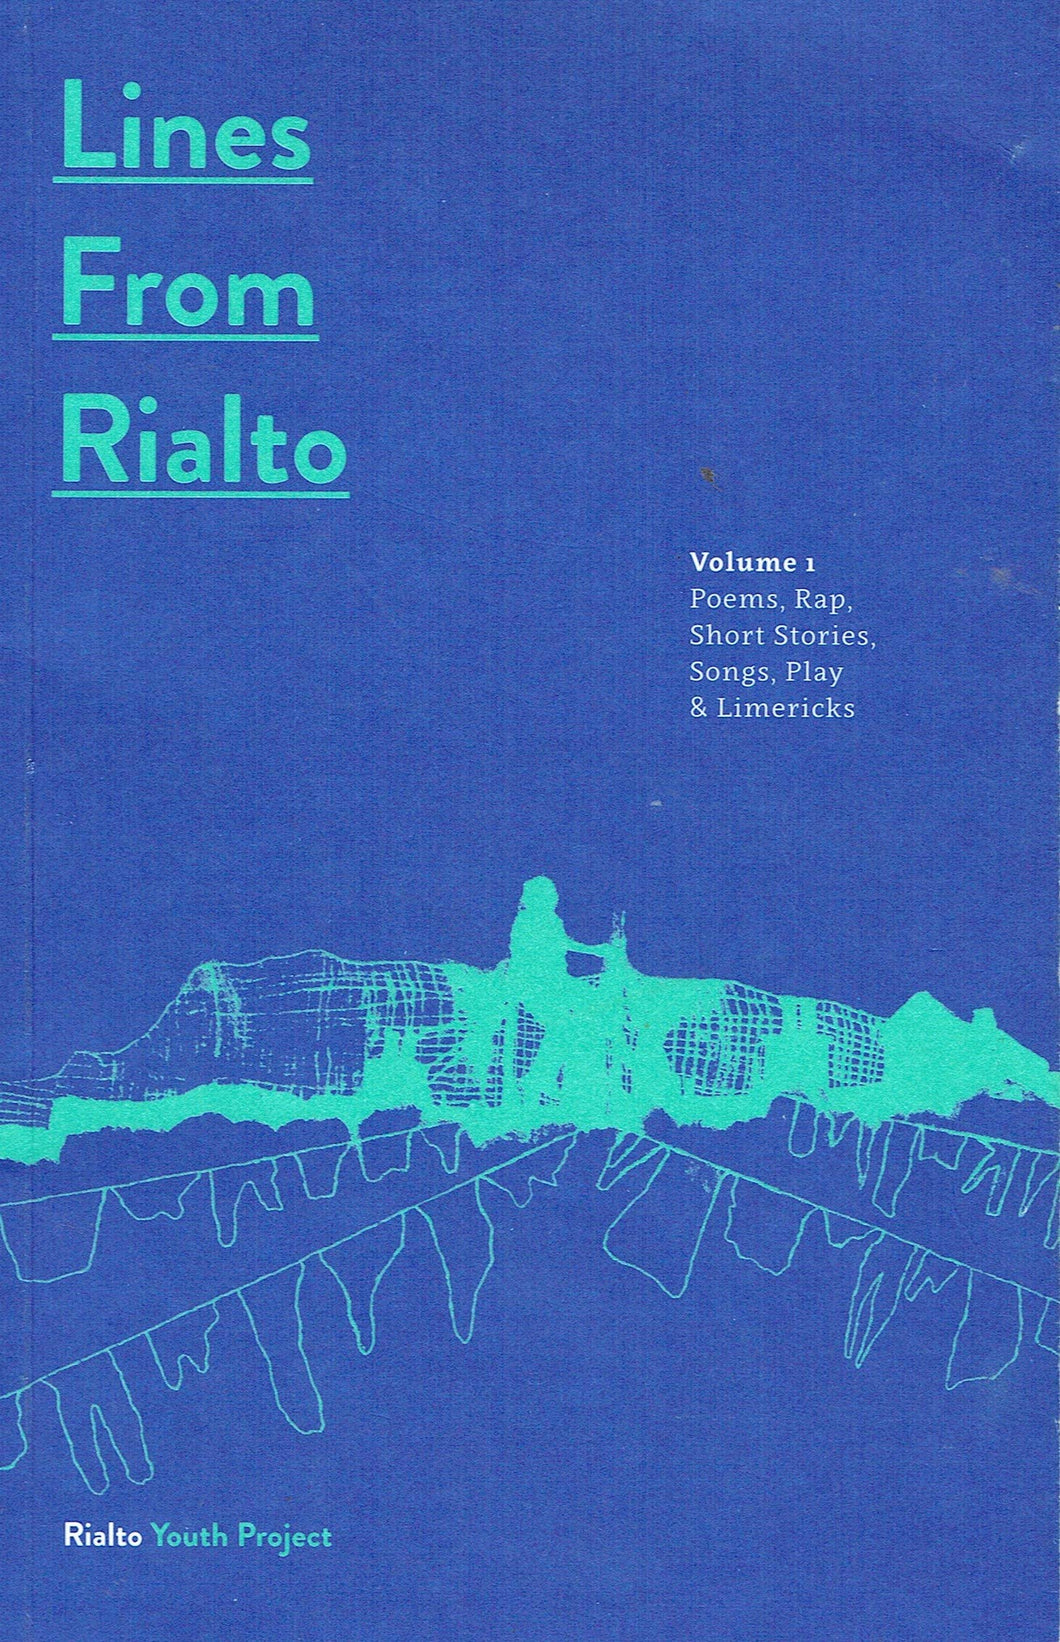 Lines From Rialto, Volume 1: Poems, Rap, Short Stories, Songs, Play and Limericks